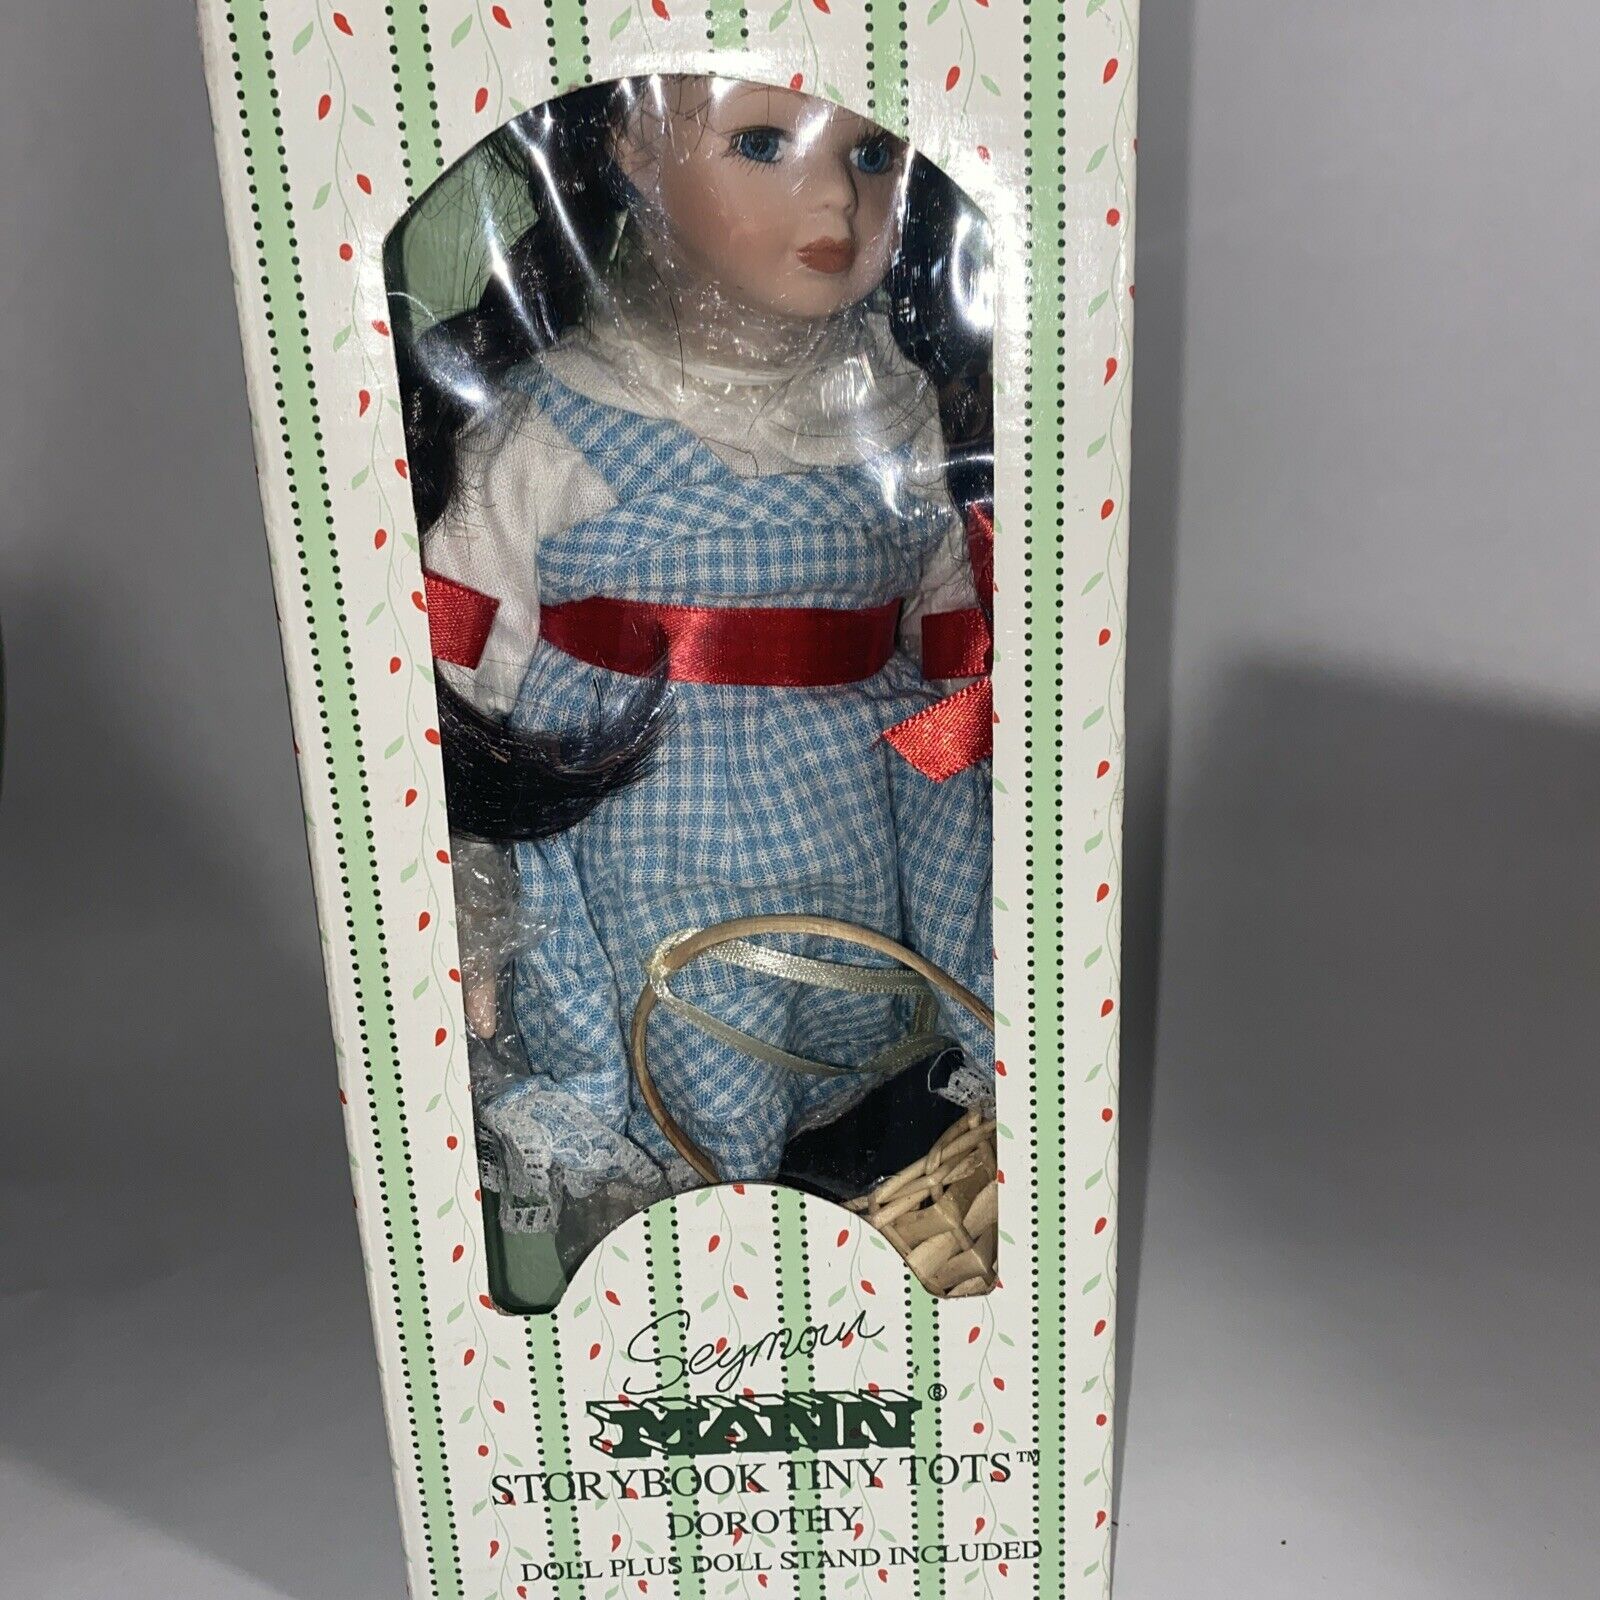 Seymour Mann Wizard Of Oz Dorothy Storybook Tiny Tots Porcelain Doll With Stand